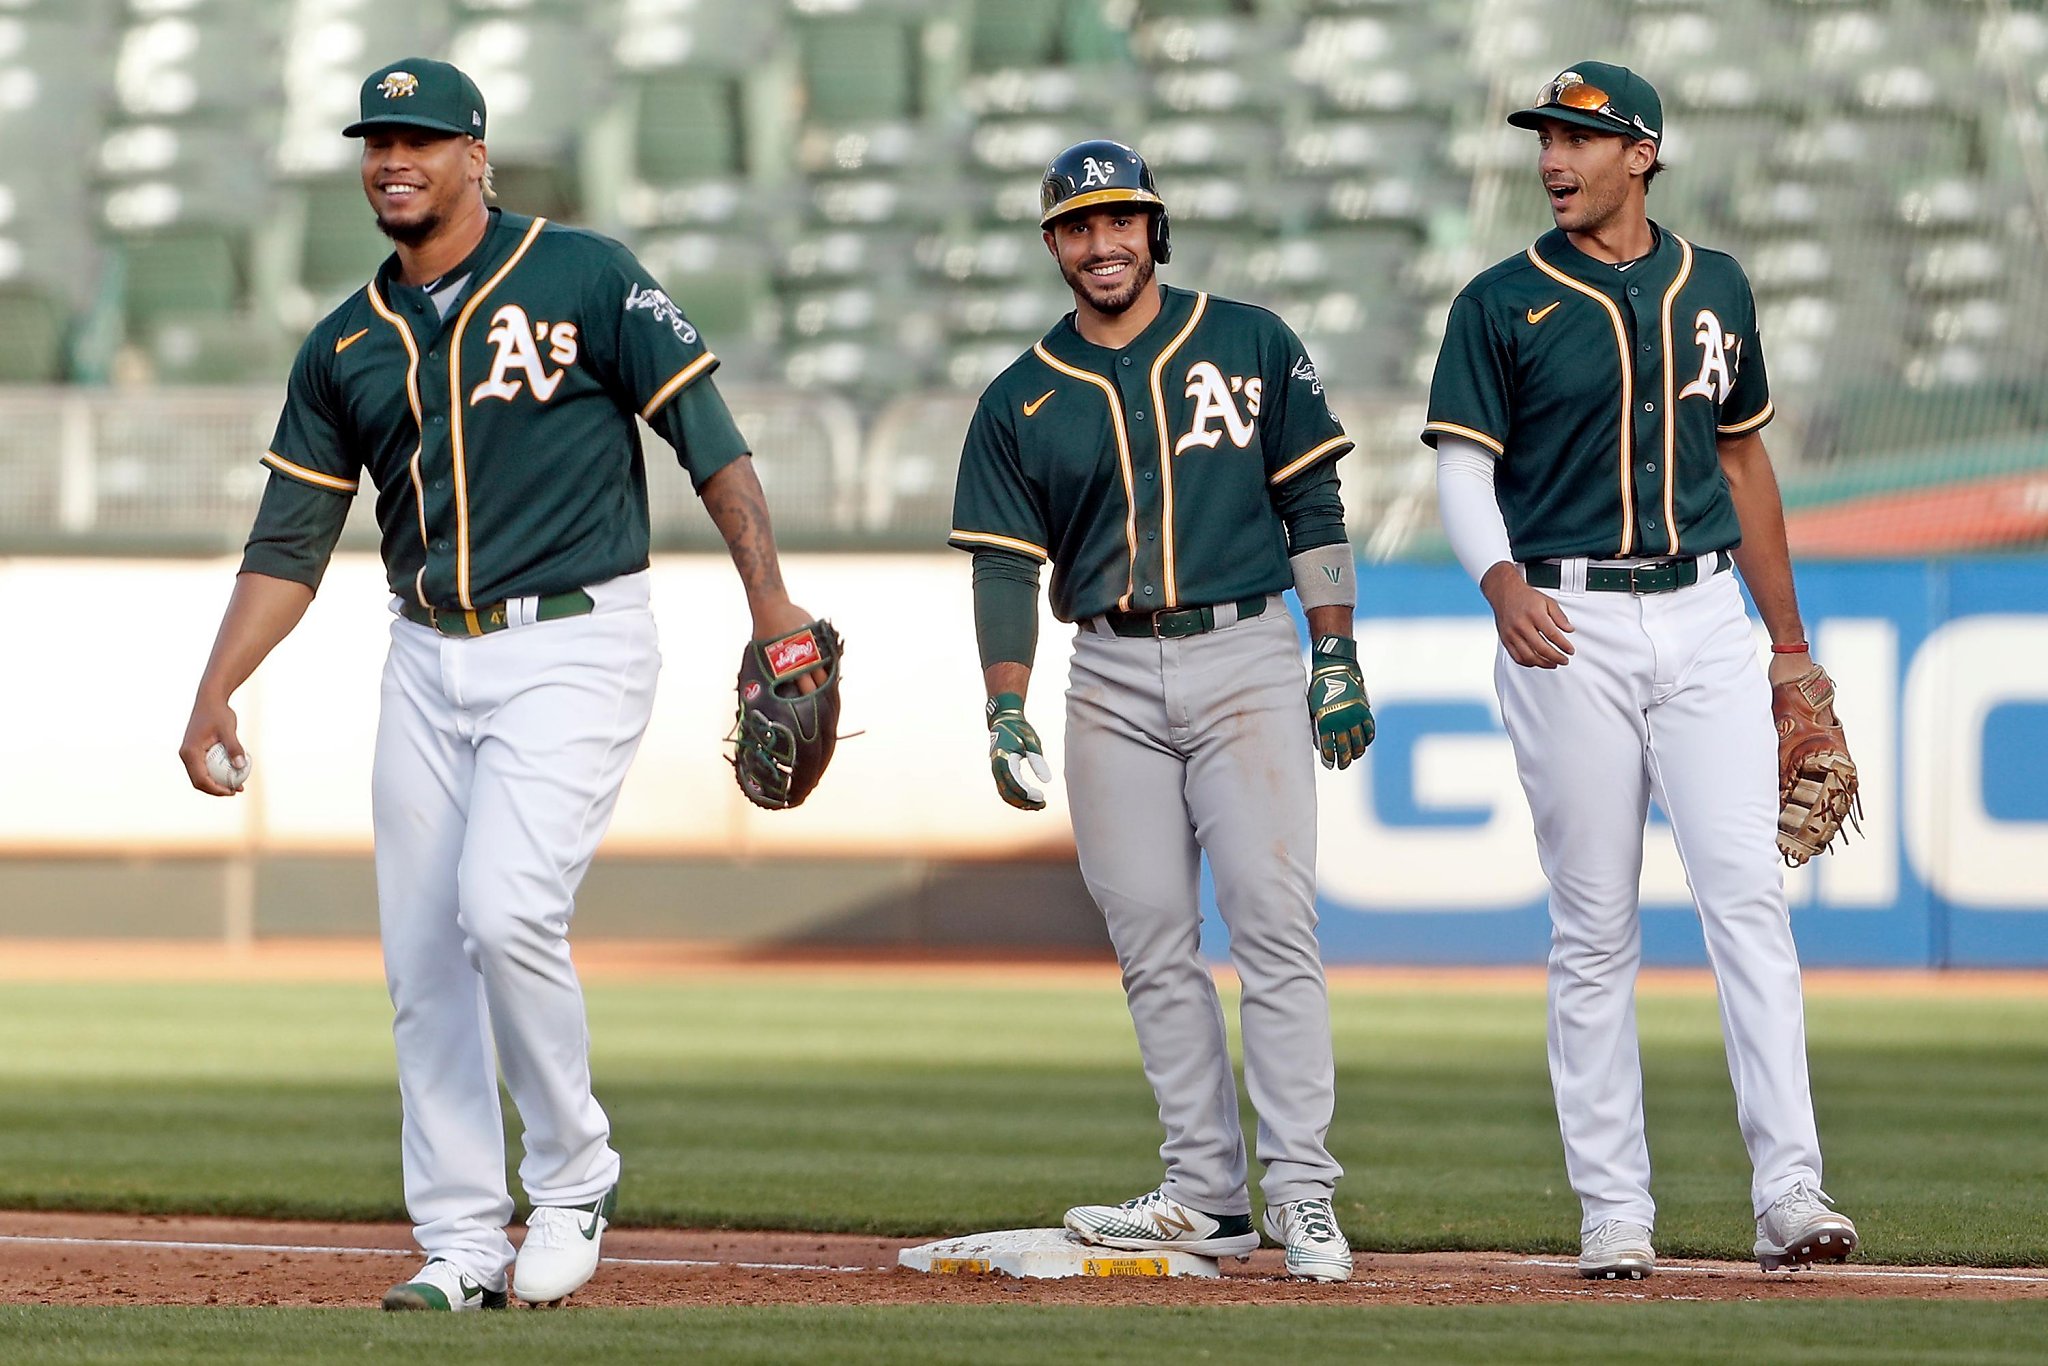 A's 2020 season projections: Analyzing the lineup, batting order, rotation